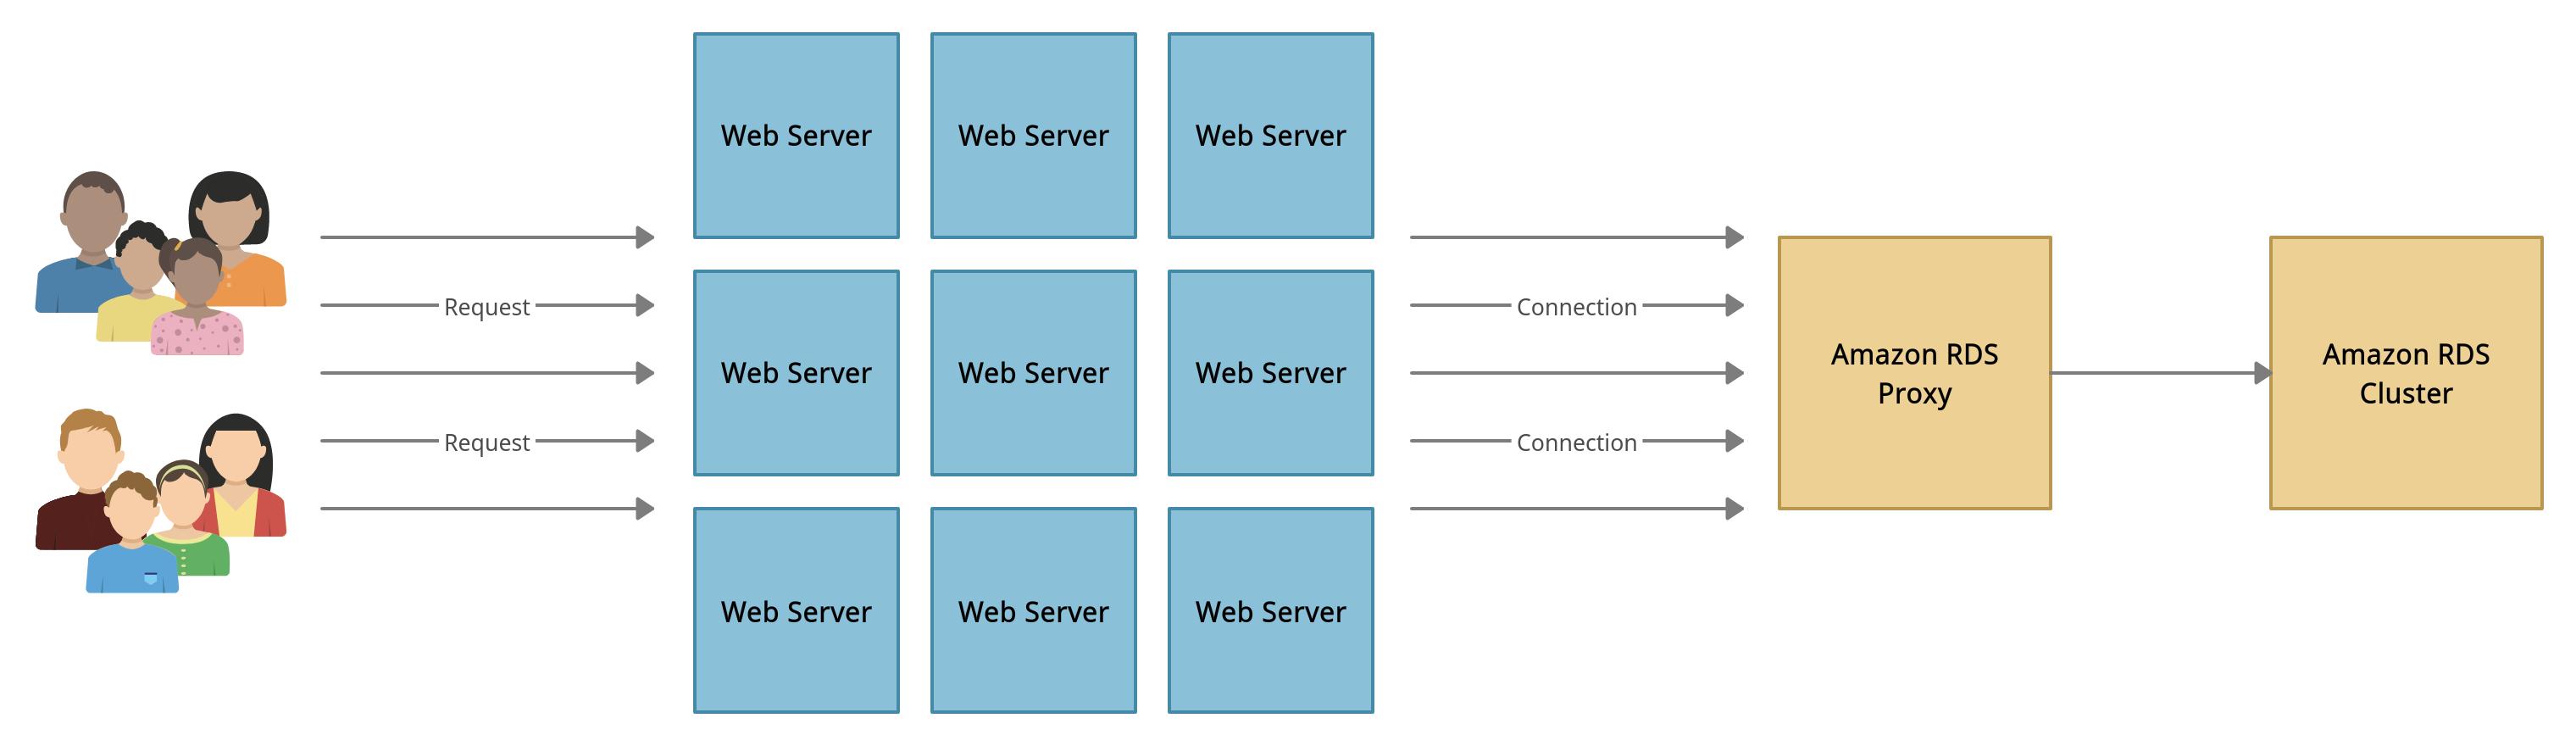 Diagram demonstrating connections when after applying Amazon RDS Proxy